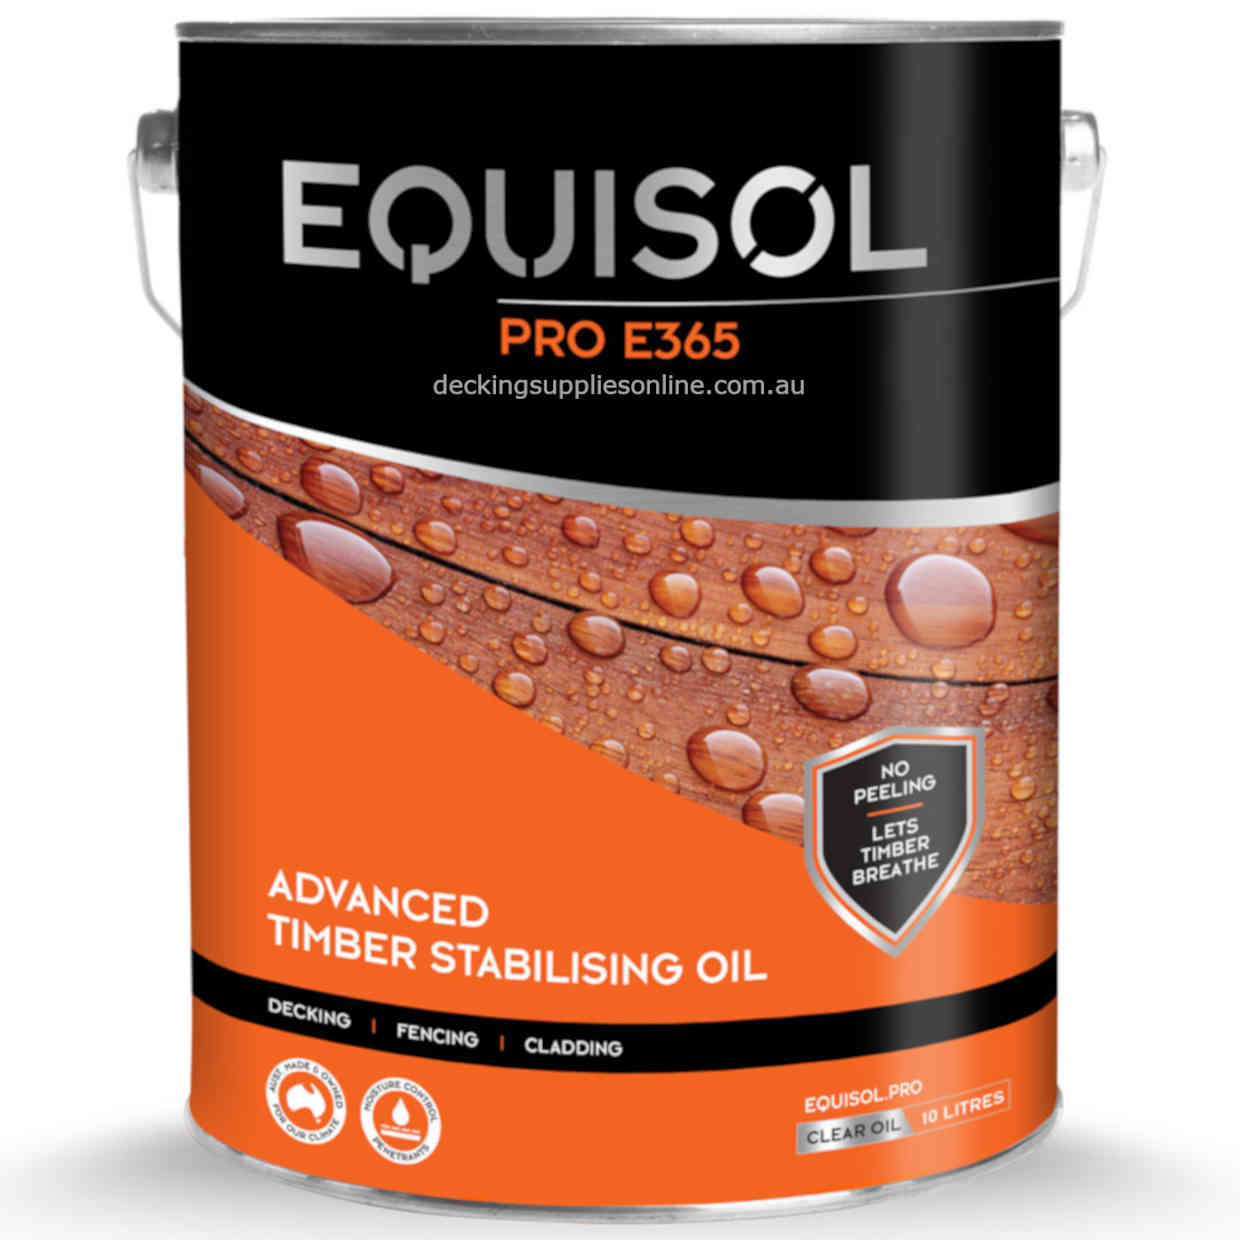 EQUISOL_Pro_365_10_Litre_Fast_Drying_Decking_Oil_Decking_Supplies_Online